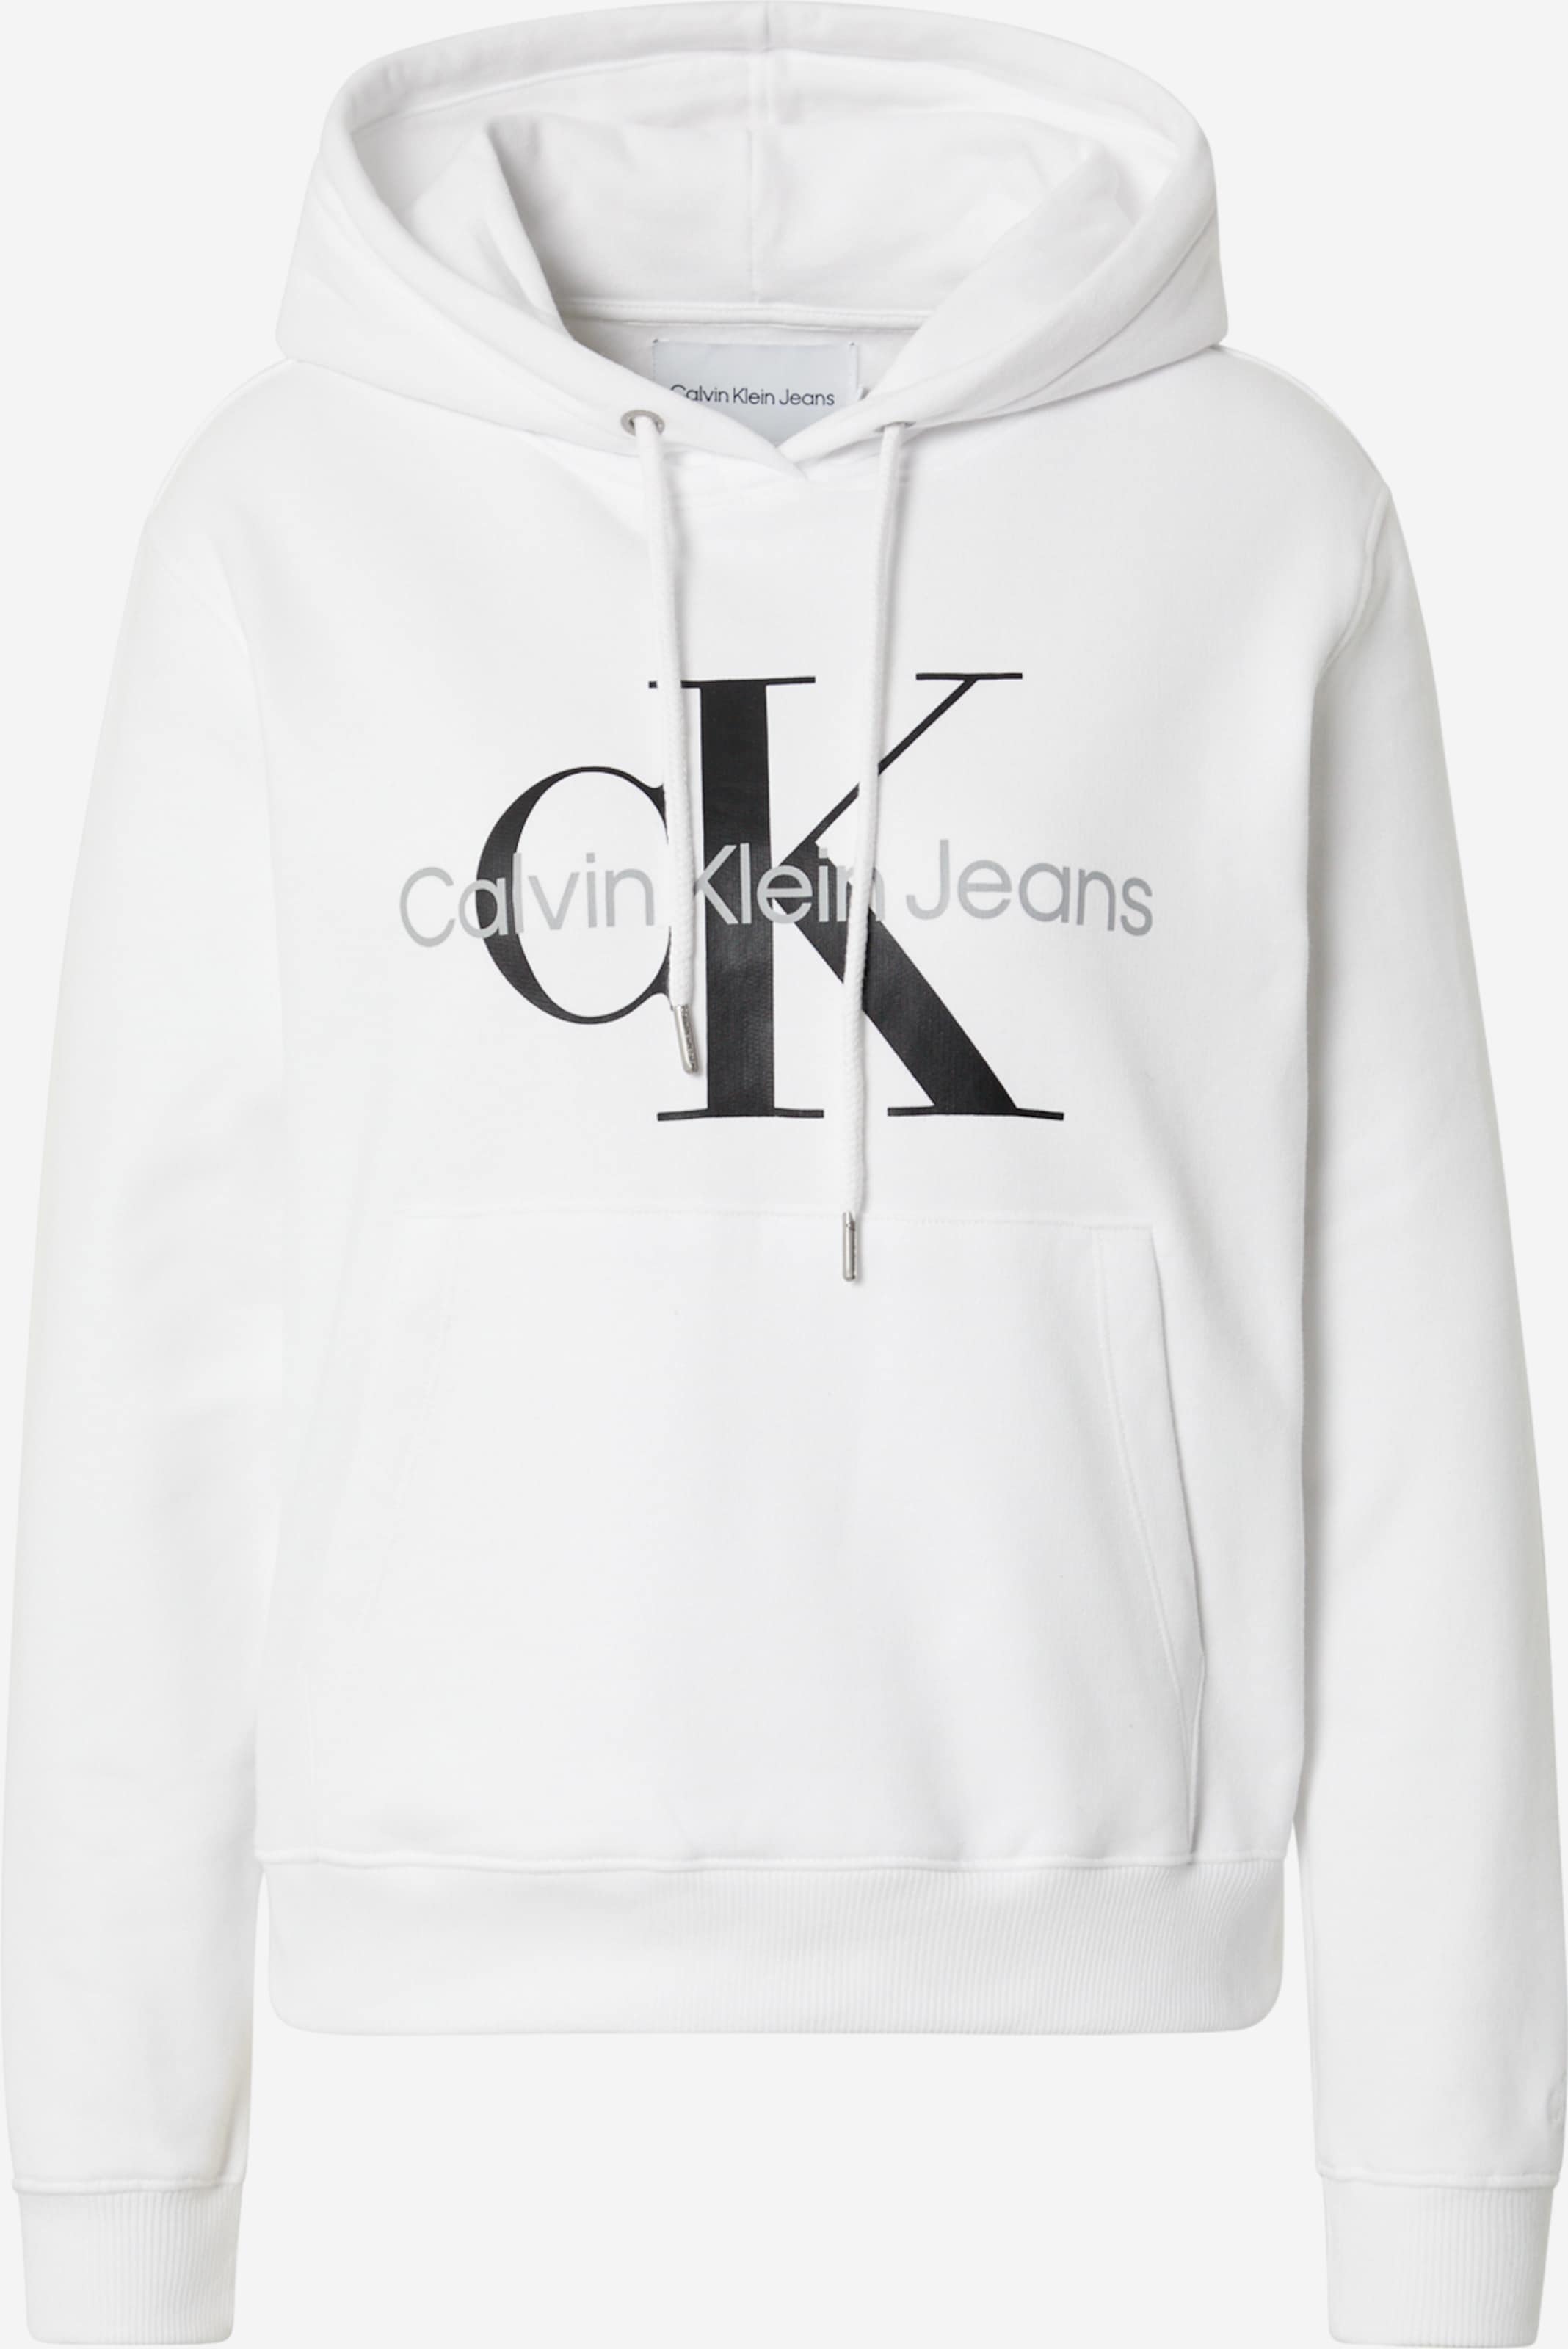 oog Soms Bloedbad Calvin Klein Jeans Sweatshirt in Wit | ABOUT YOU